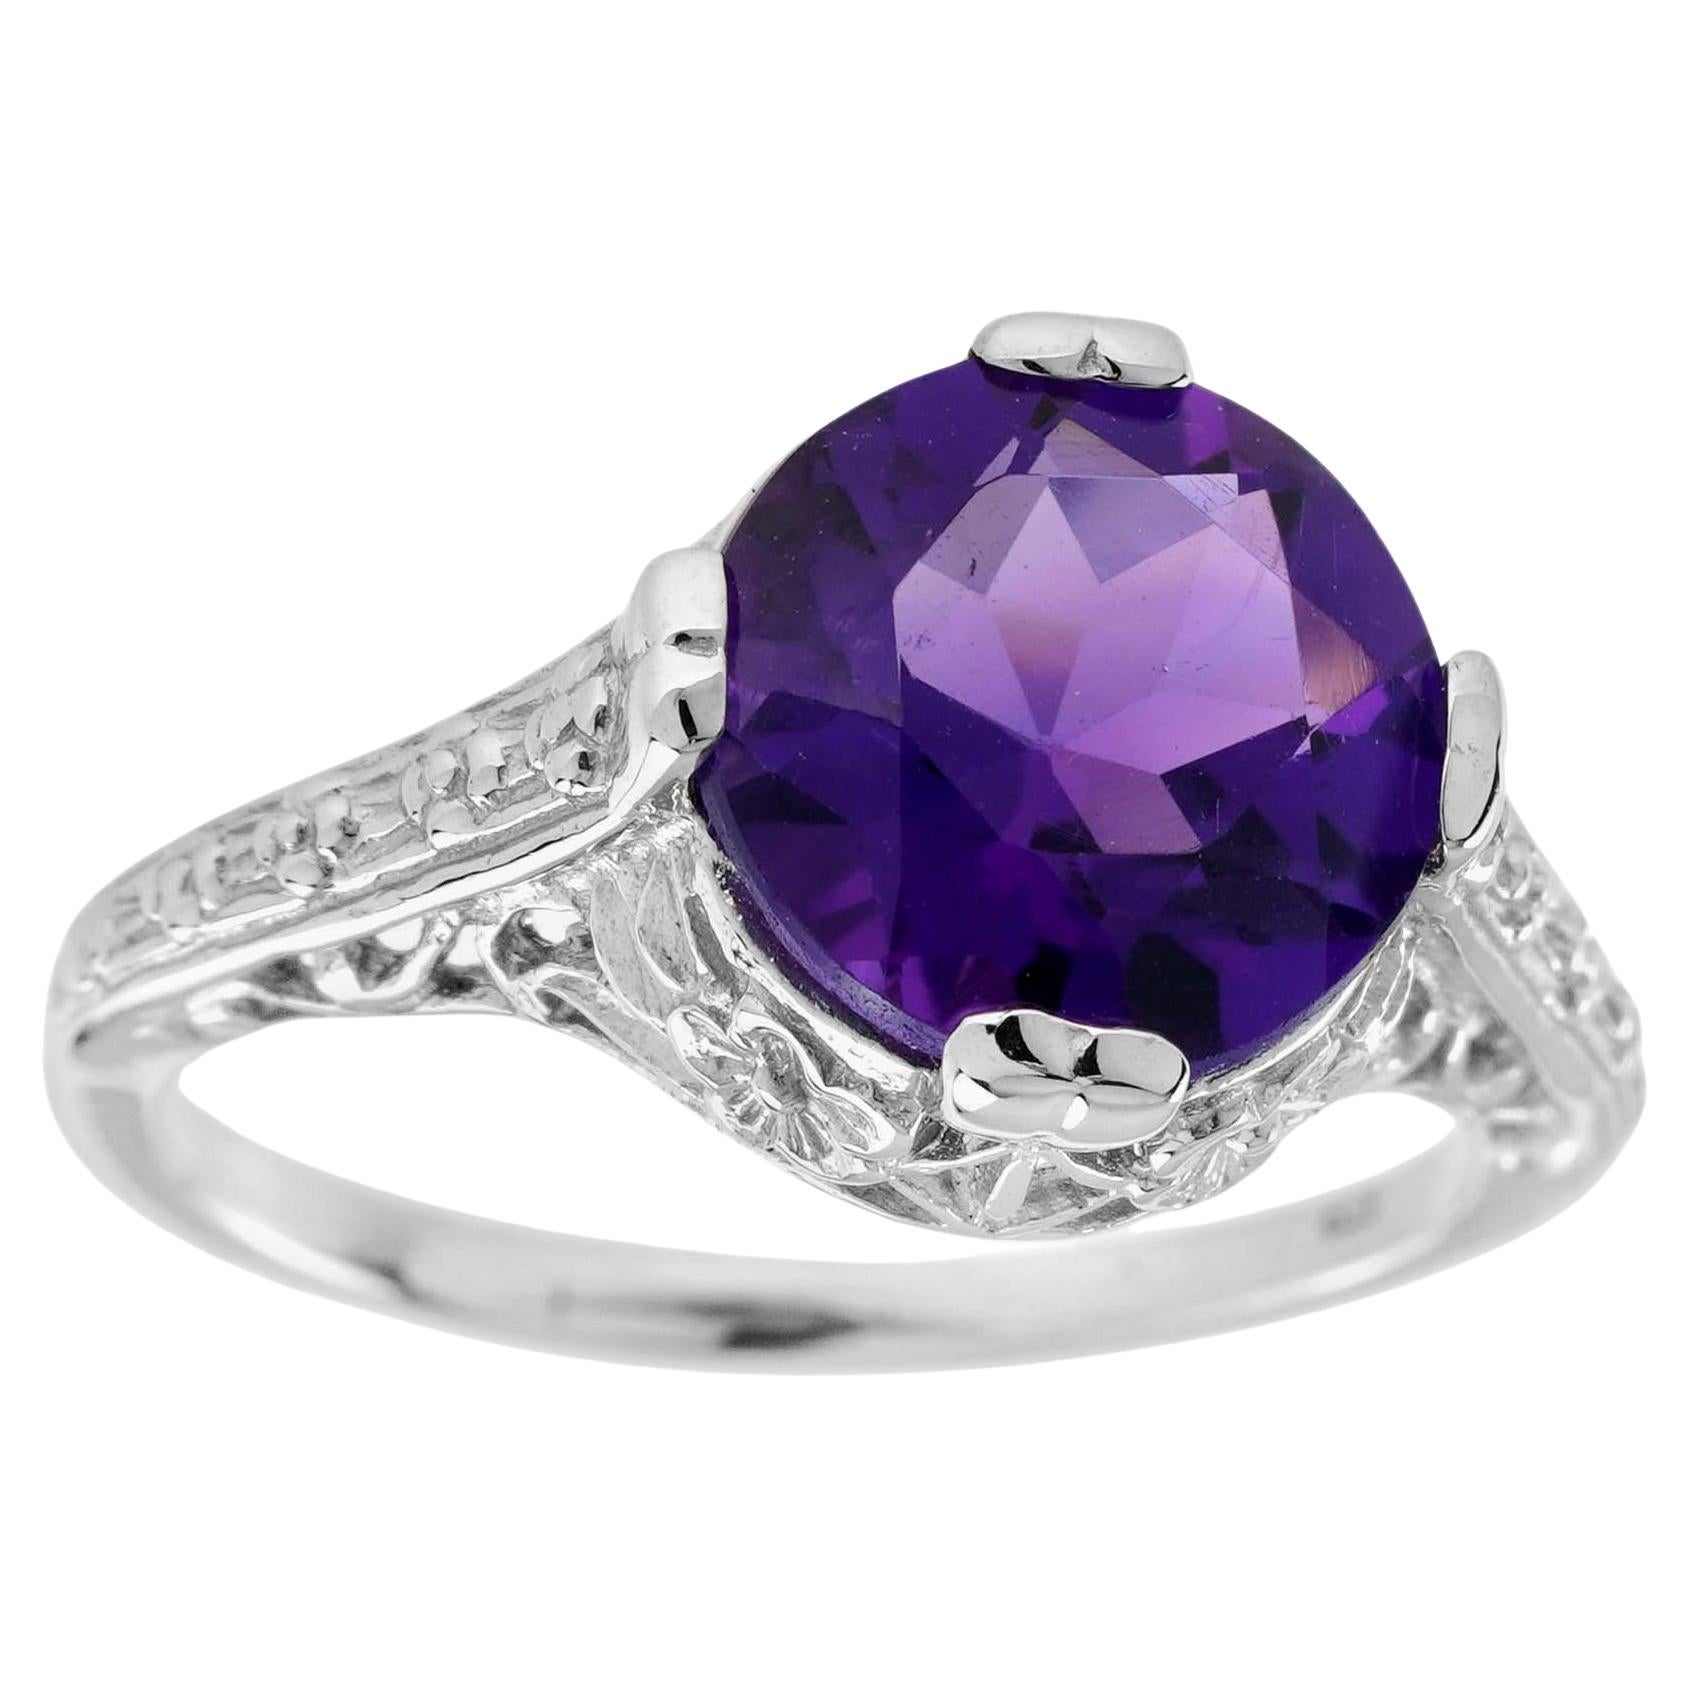 For Sale:  Natural Round Amethyst Vintage Style Filigree Ring in Solid 9K White Gold